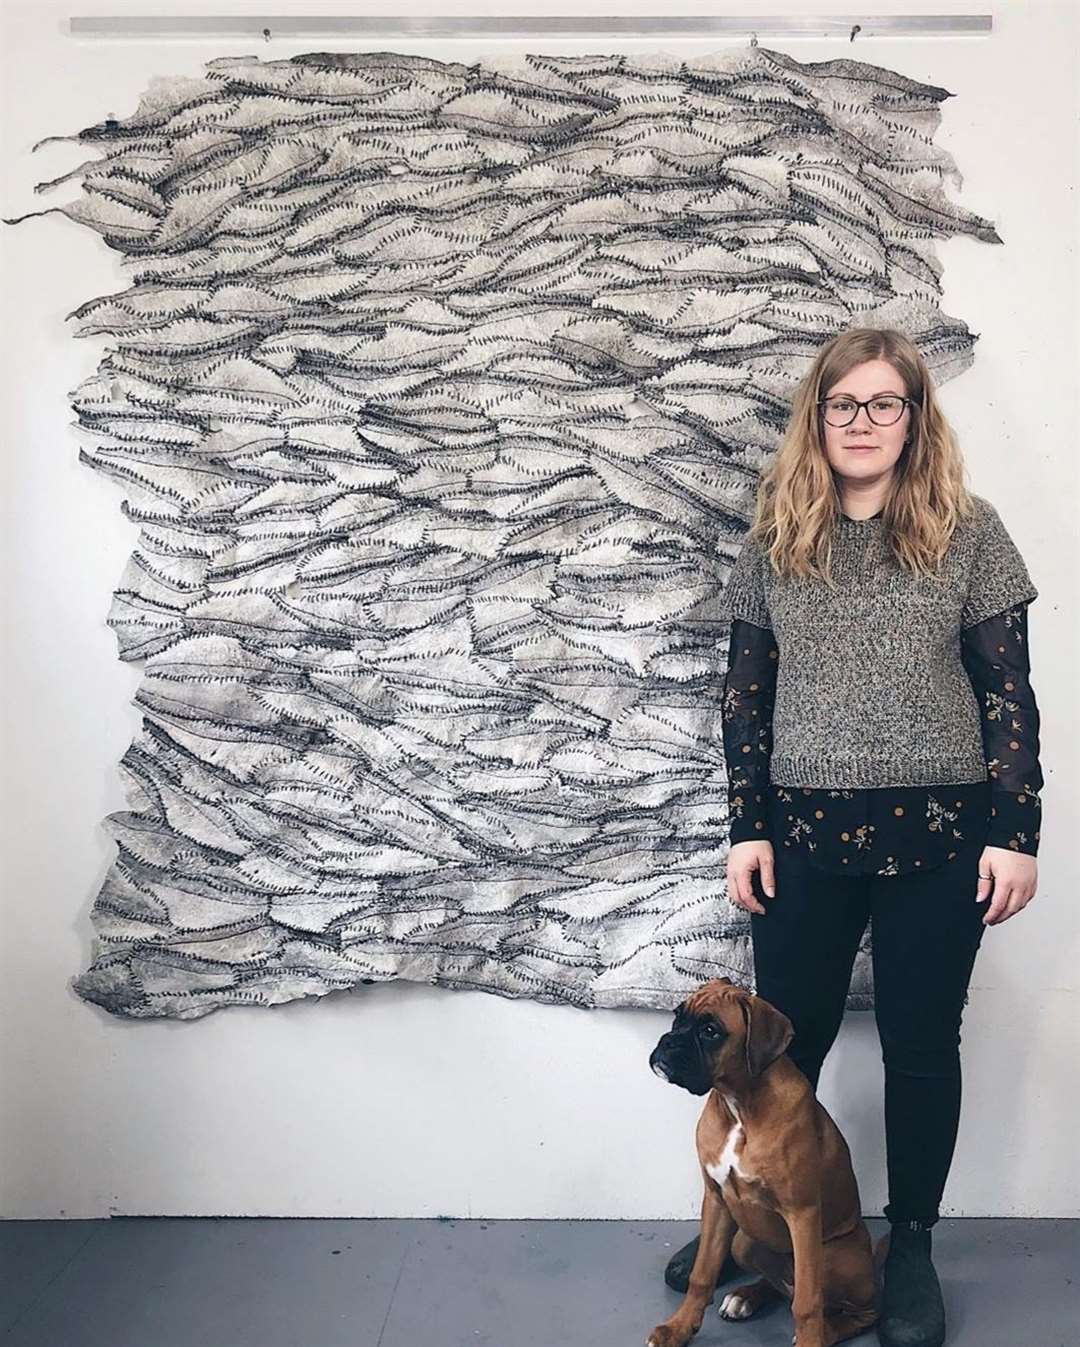 Artist Vivian Ross-Smith with Network, made of haddock skins stitched together with Shetland wool.